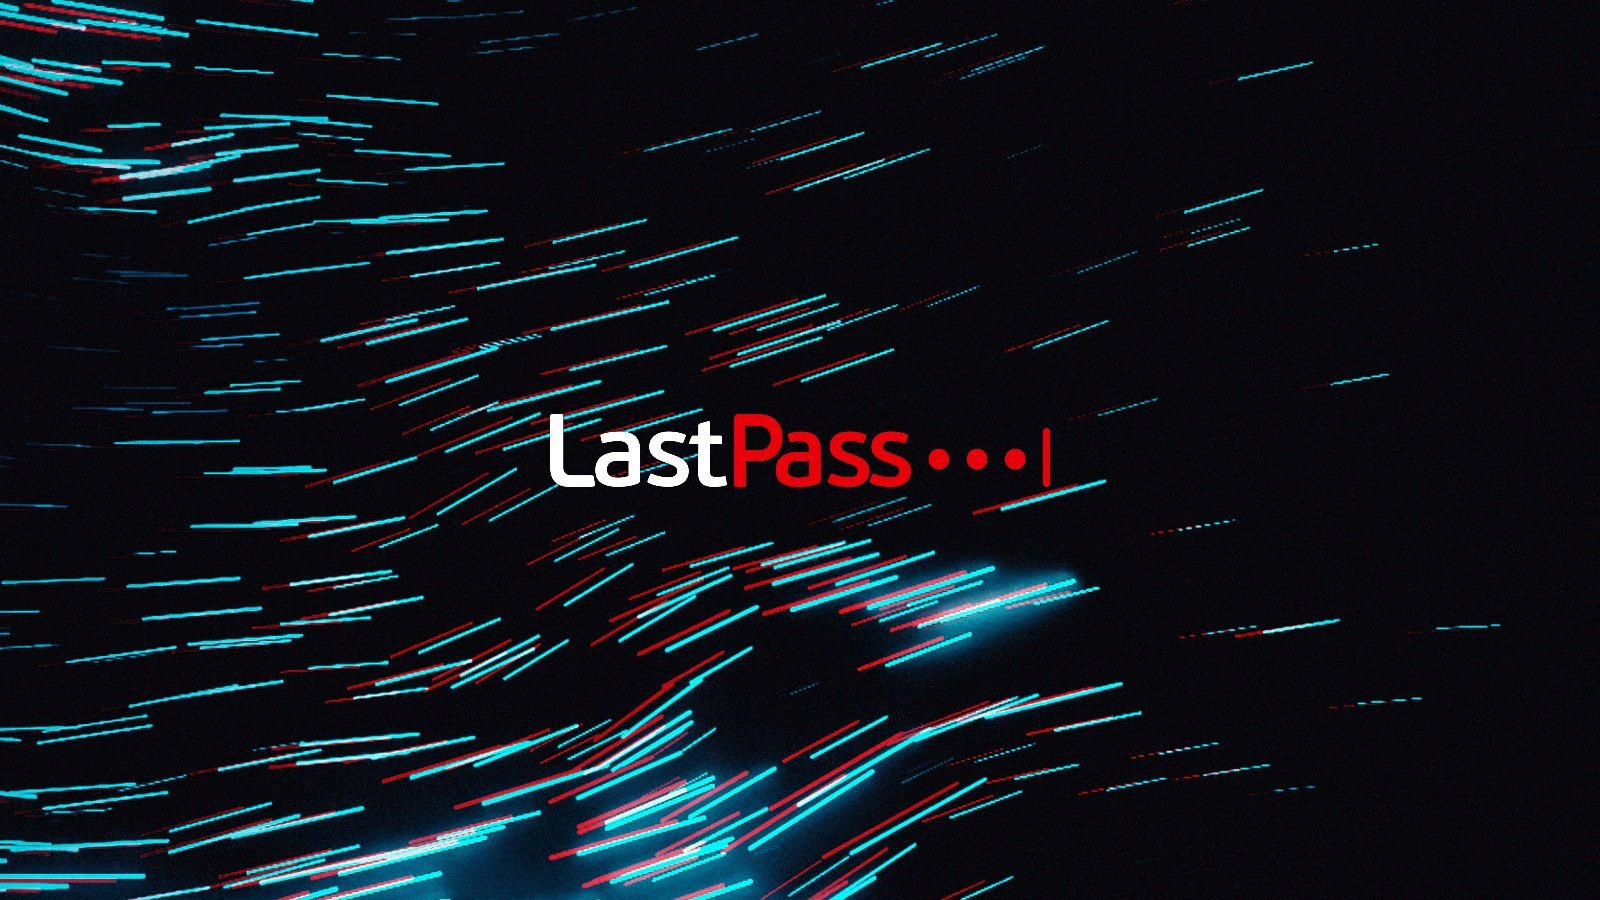 lastpass-users-furious-after-being-locked-out-due-to-mfa-resets